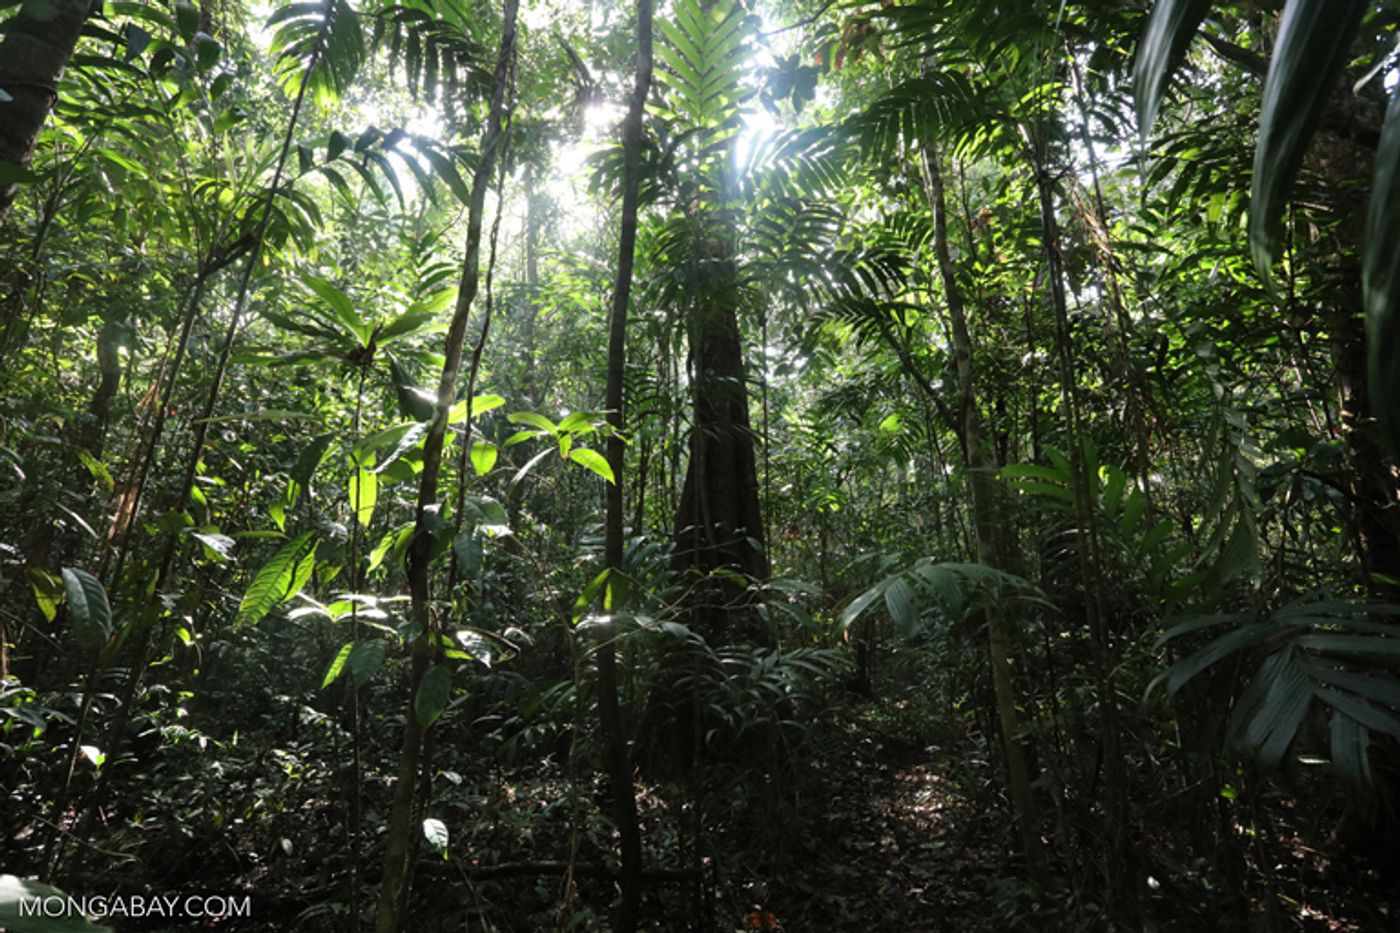 This forest in the Southern Cardamom Mountains in Cambodia is a huge carbon sink. Photo: Rhett A. Butler, Mongabay